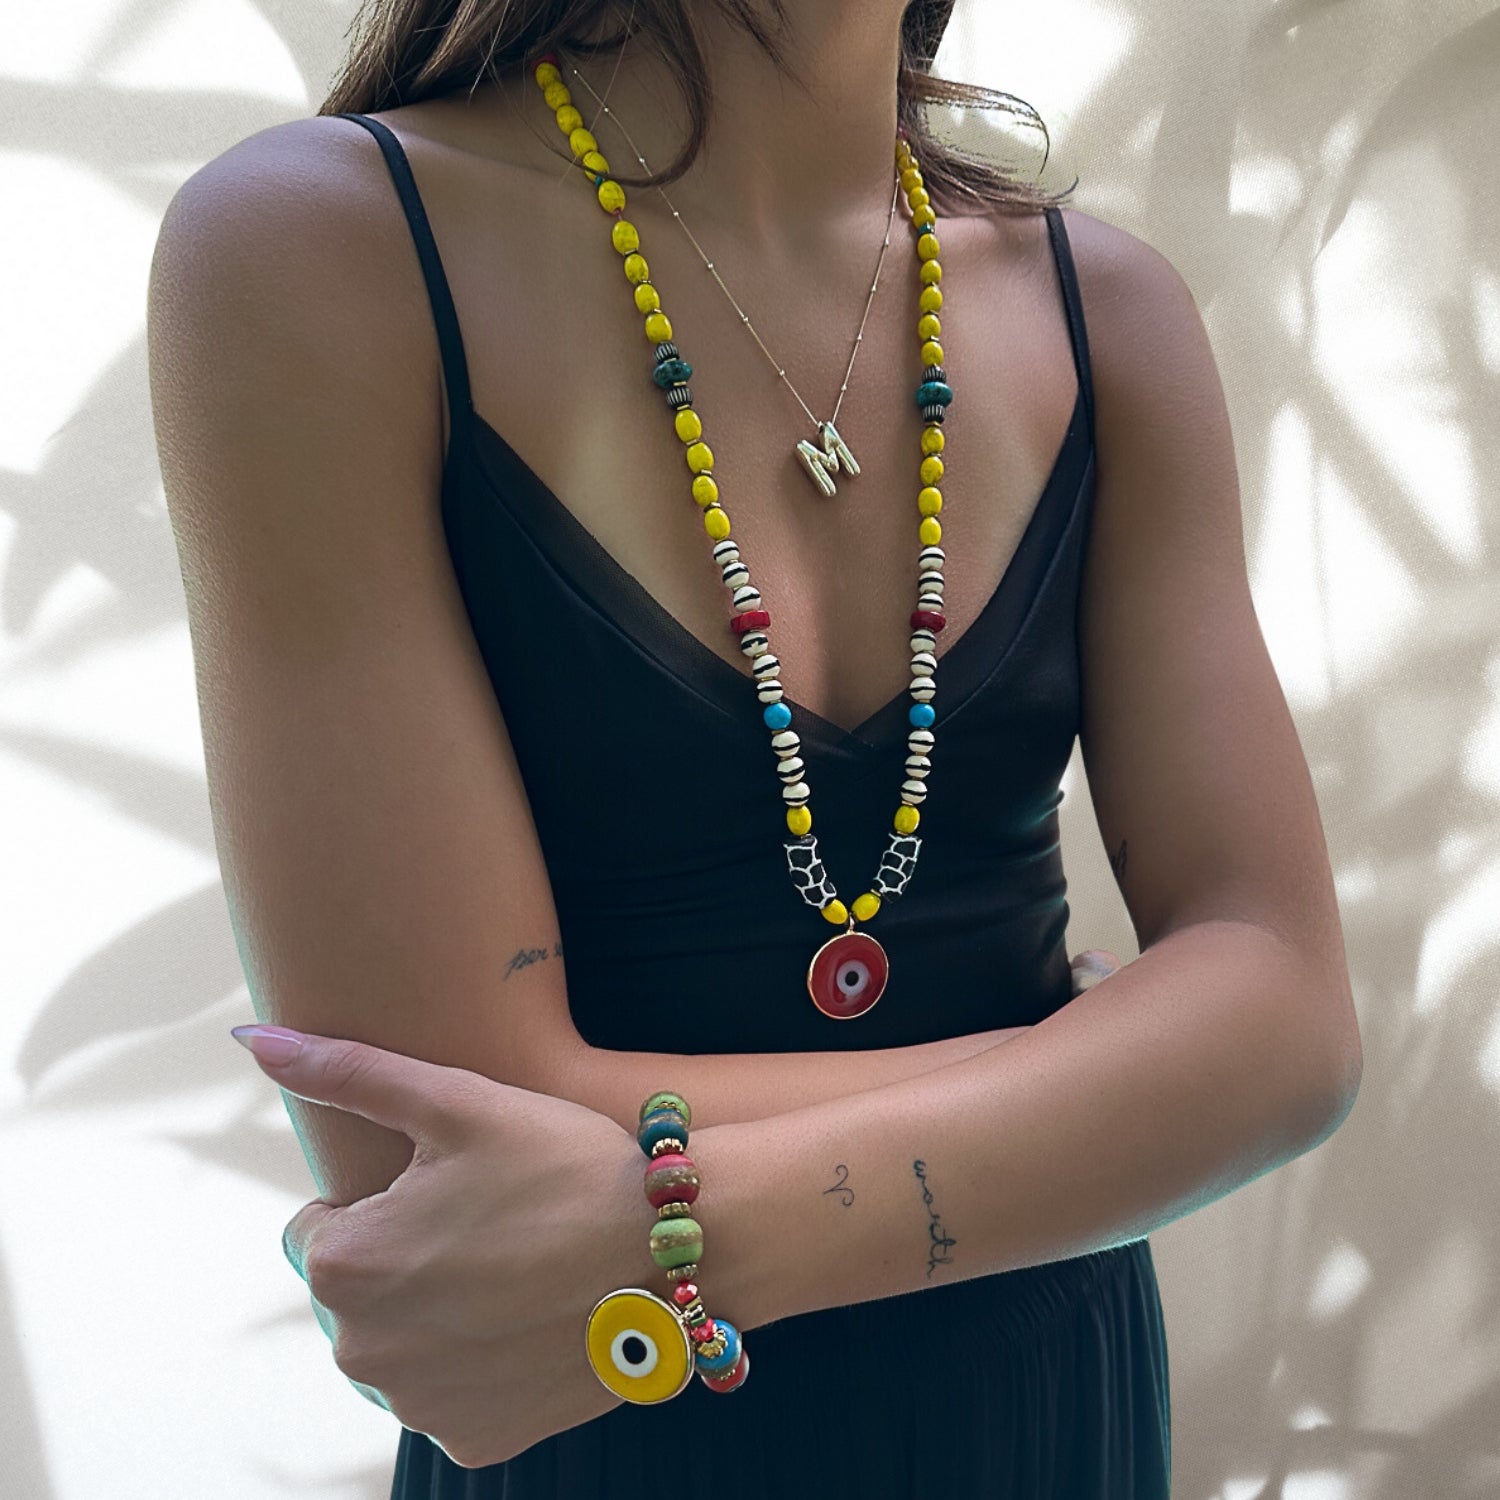 Model wearing the African Yellow Happiness Necklace, showcasing its vibrant colors and cultural significance.